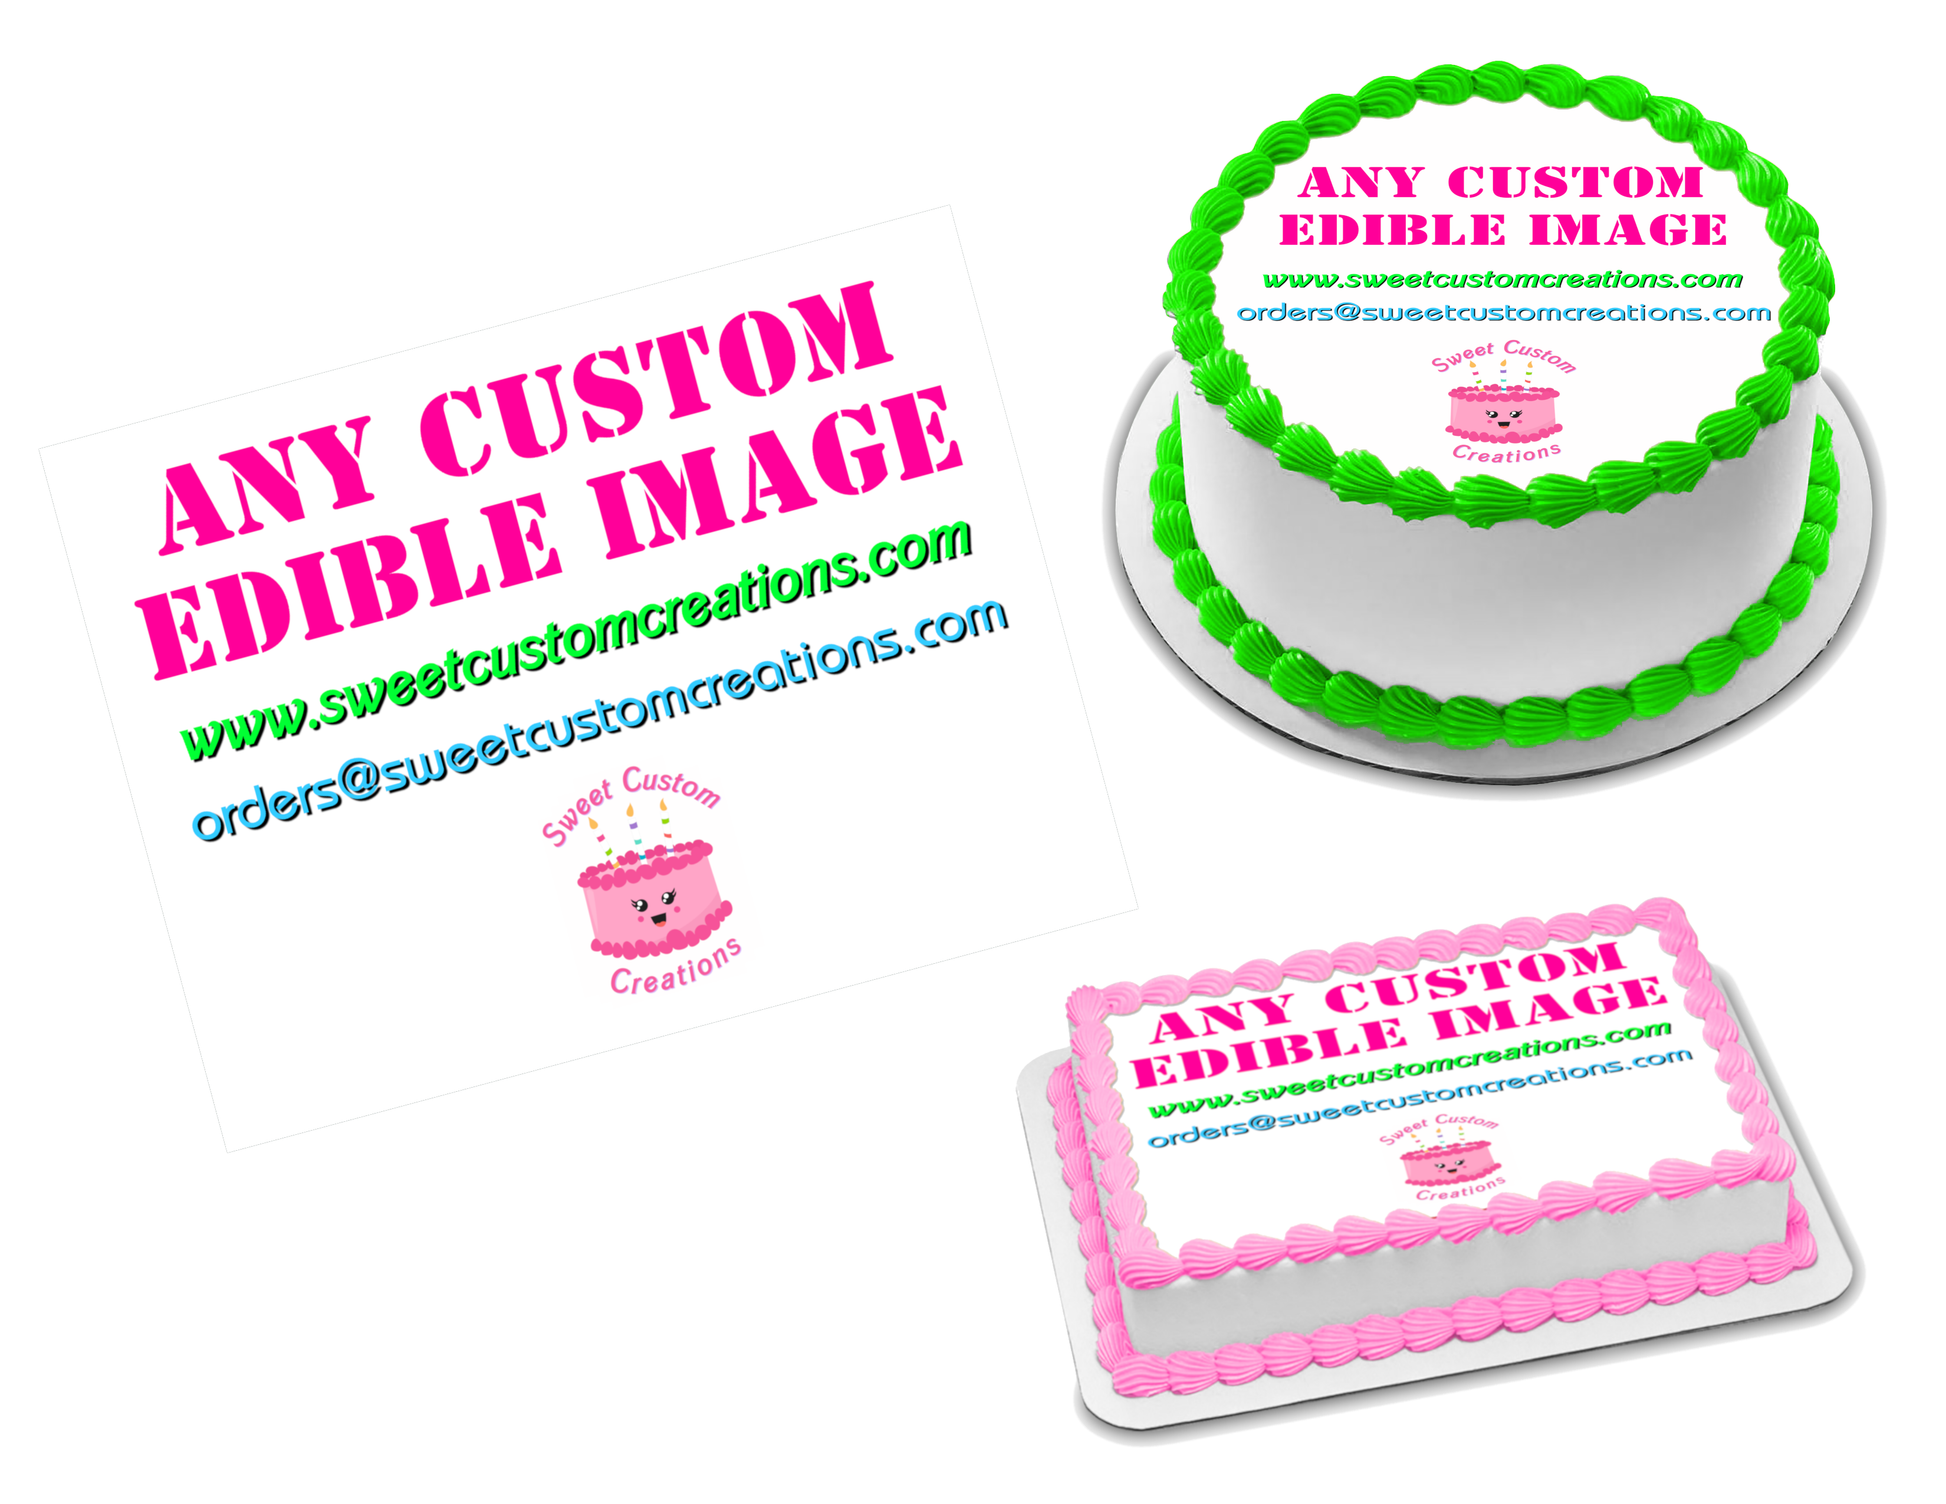 Louis Style Inspired Logo Cupcake Toppers **DIGITAL ORDER ONLY** Pink  Toppers